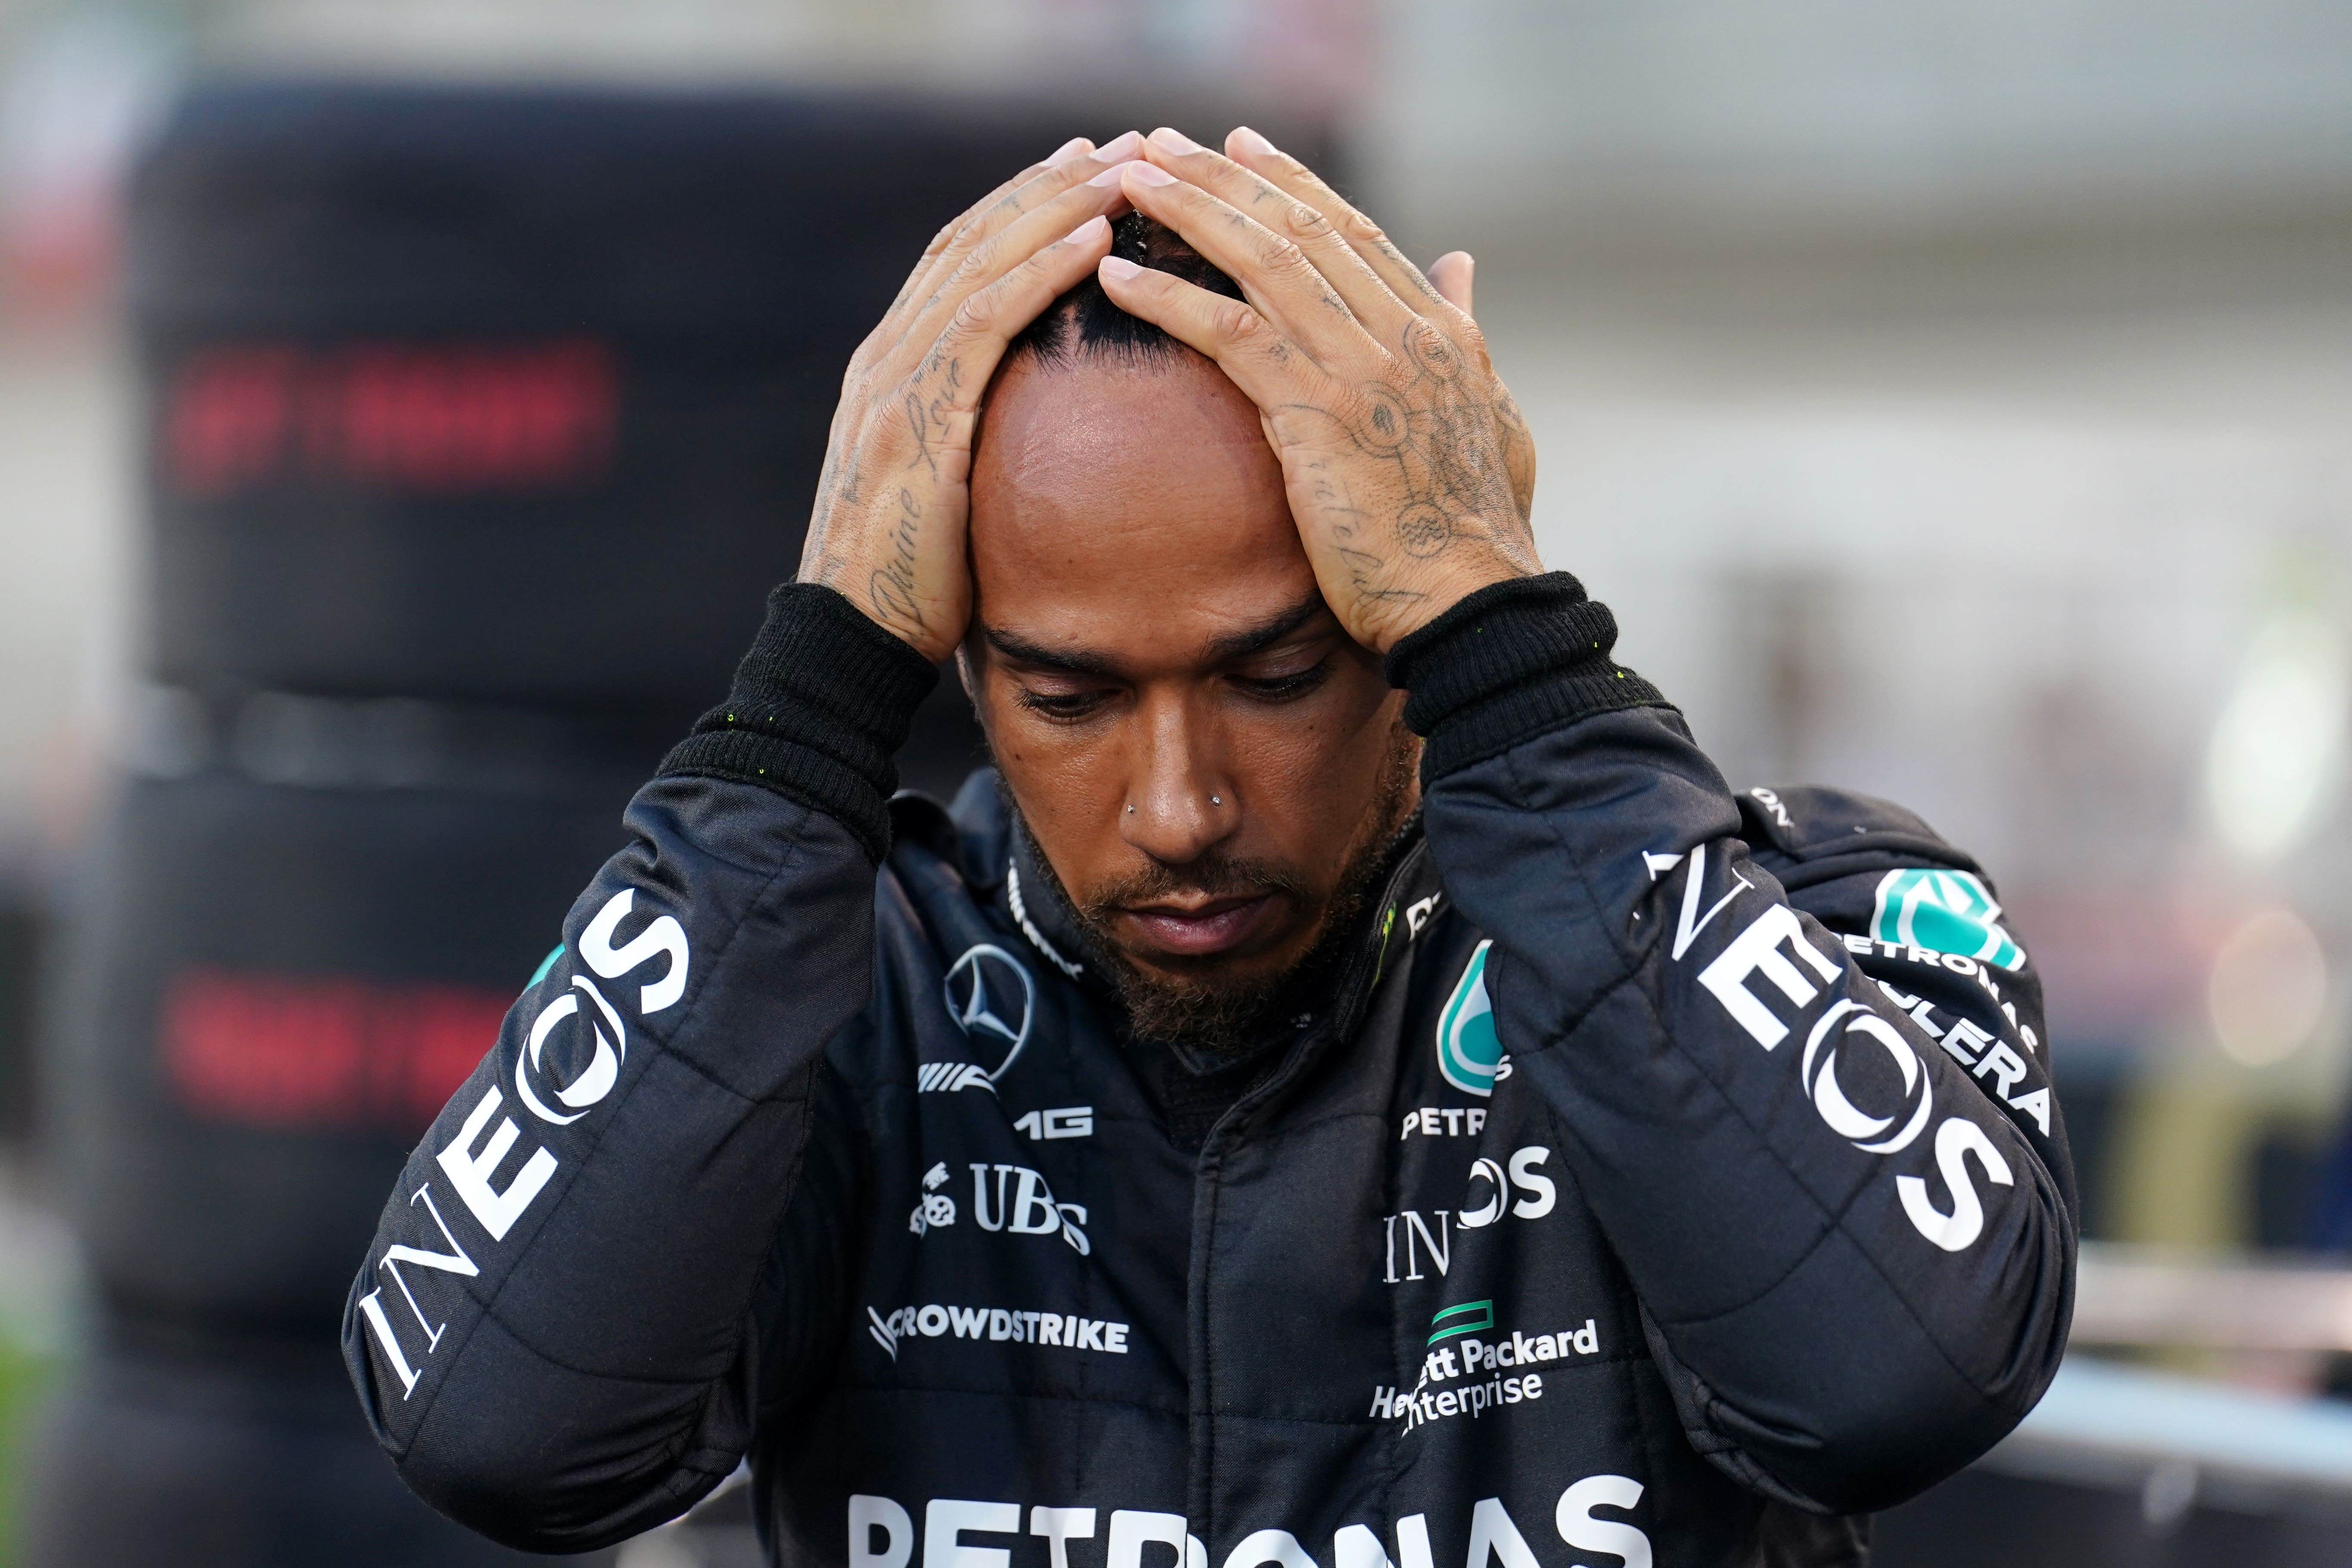 Lewis Hamilton finished fifth at the Bahrain Grand Prix